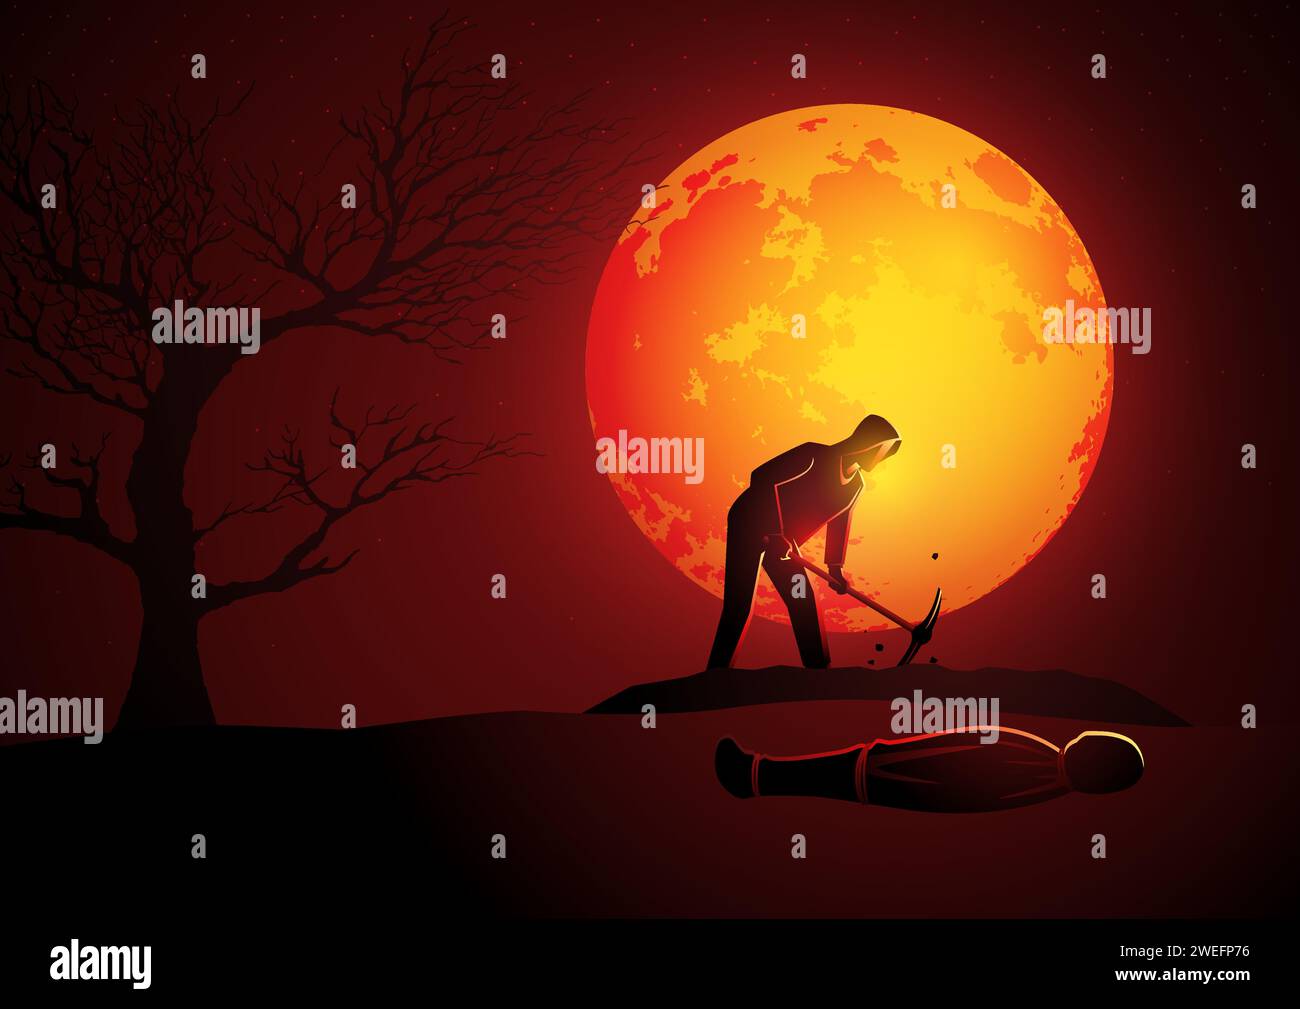 Vector illustration of a killer wearing hoody digging a grave for his victim during full moon, suitable for Halloween or horror theme Stock Vector